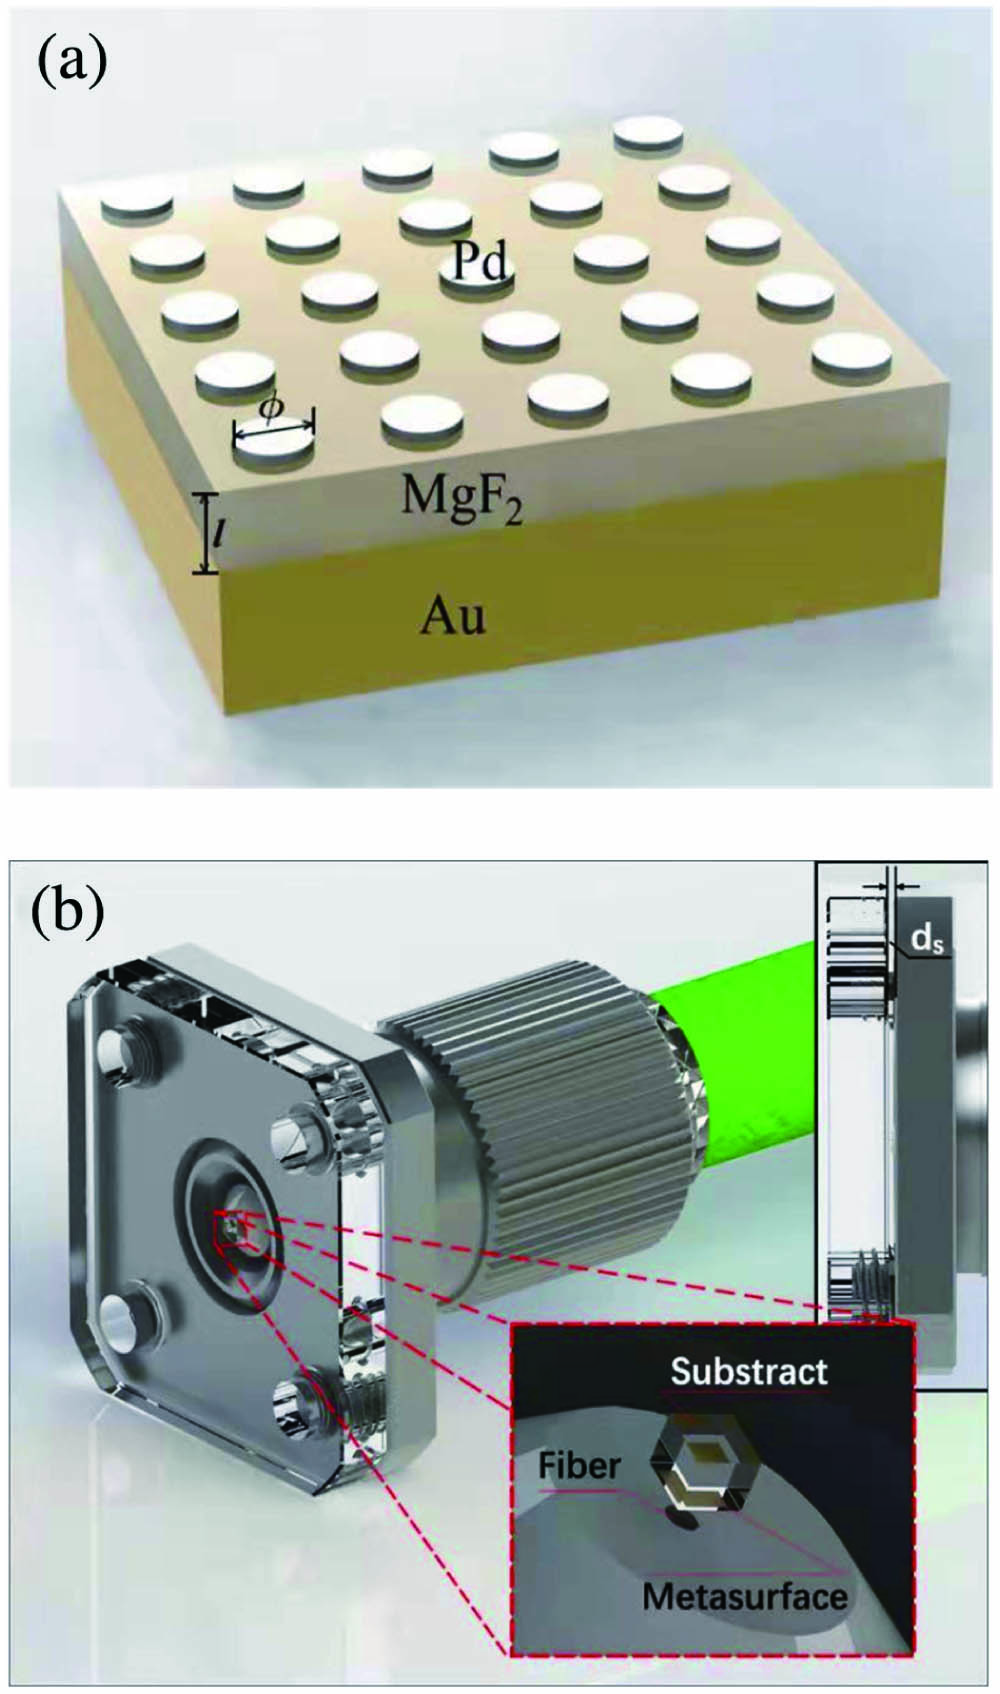 (a) Schematic of the Pd-based metasurface considered in this study. Pd nanodisks are separated from an Au mirror by a dielectric spacer layer (magnesium fluoride, MgF2). Upon H2 absorption, the dielectric function and the size of the Pd nanodisks change, leading to a change in the reflectance spectrum of the structure. (b) The H2 sensor is composed by a metasurface and a fiber flange plate that serves as a connector to the optical fiber. Inset: cross section of the fiber flange plate and the detail of the metasurface next to the fiber tip.